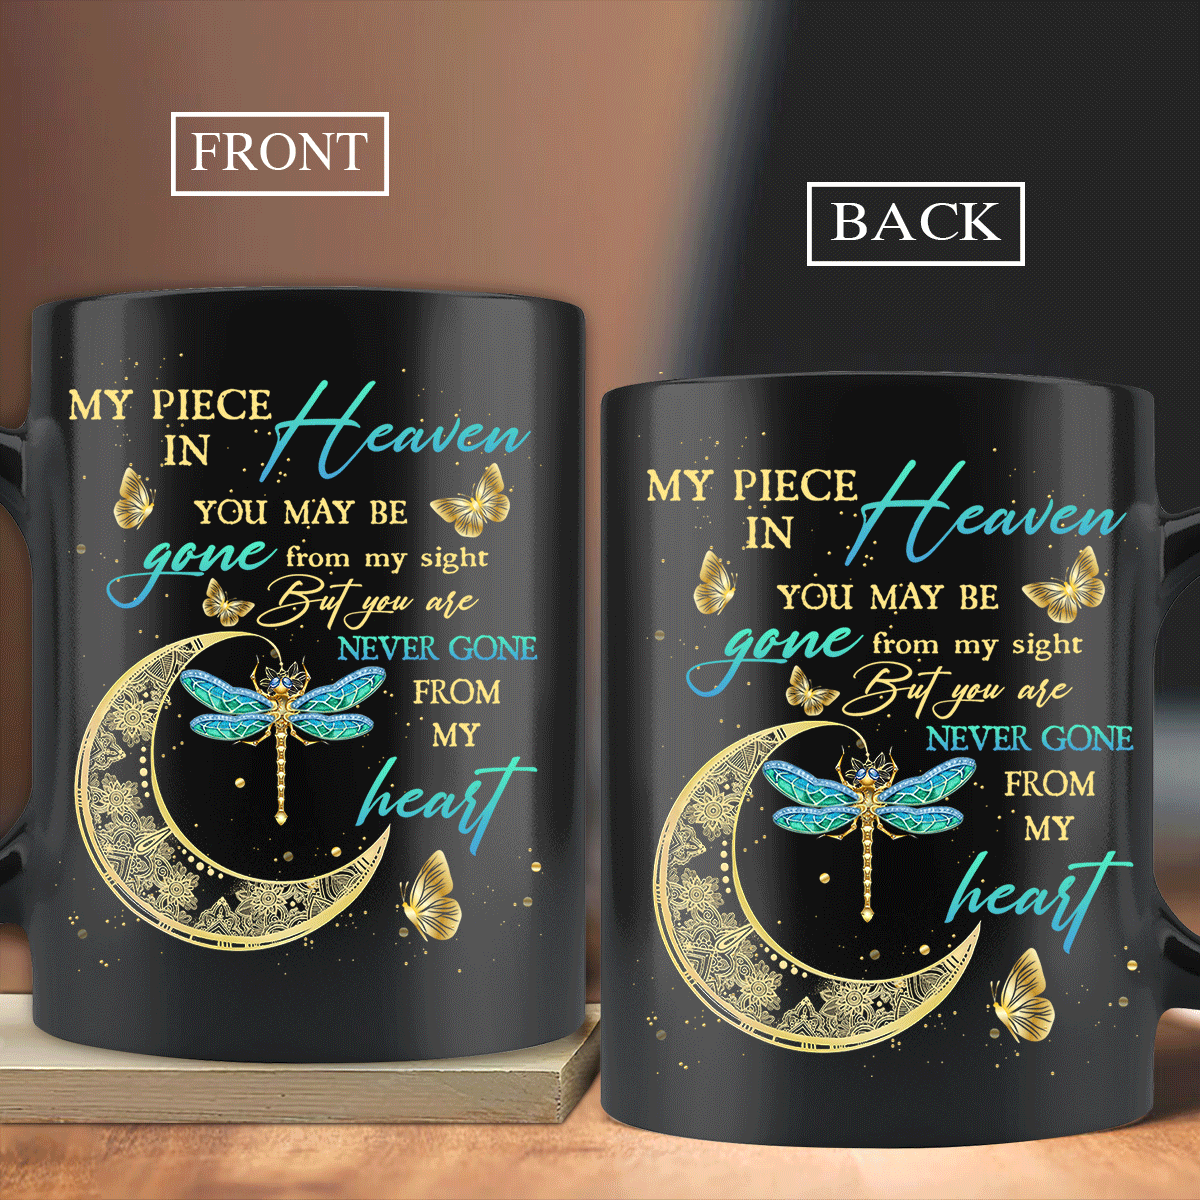 Memorial Black Mug, Sympathy Gift, Remembrance Gift, Heaven Black Mug - Golden Moon, Crystal Butterfly, You Are Never Gone From My Heart